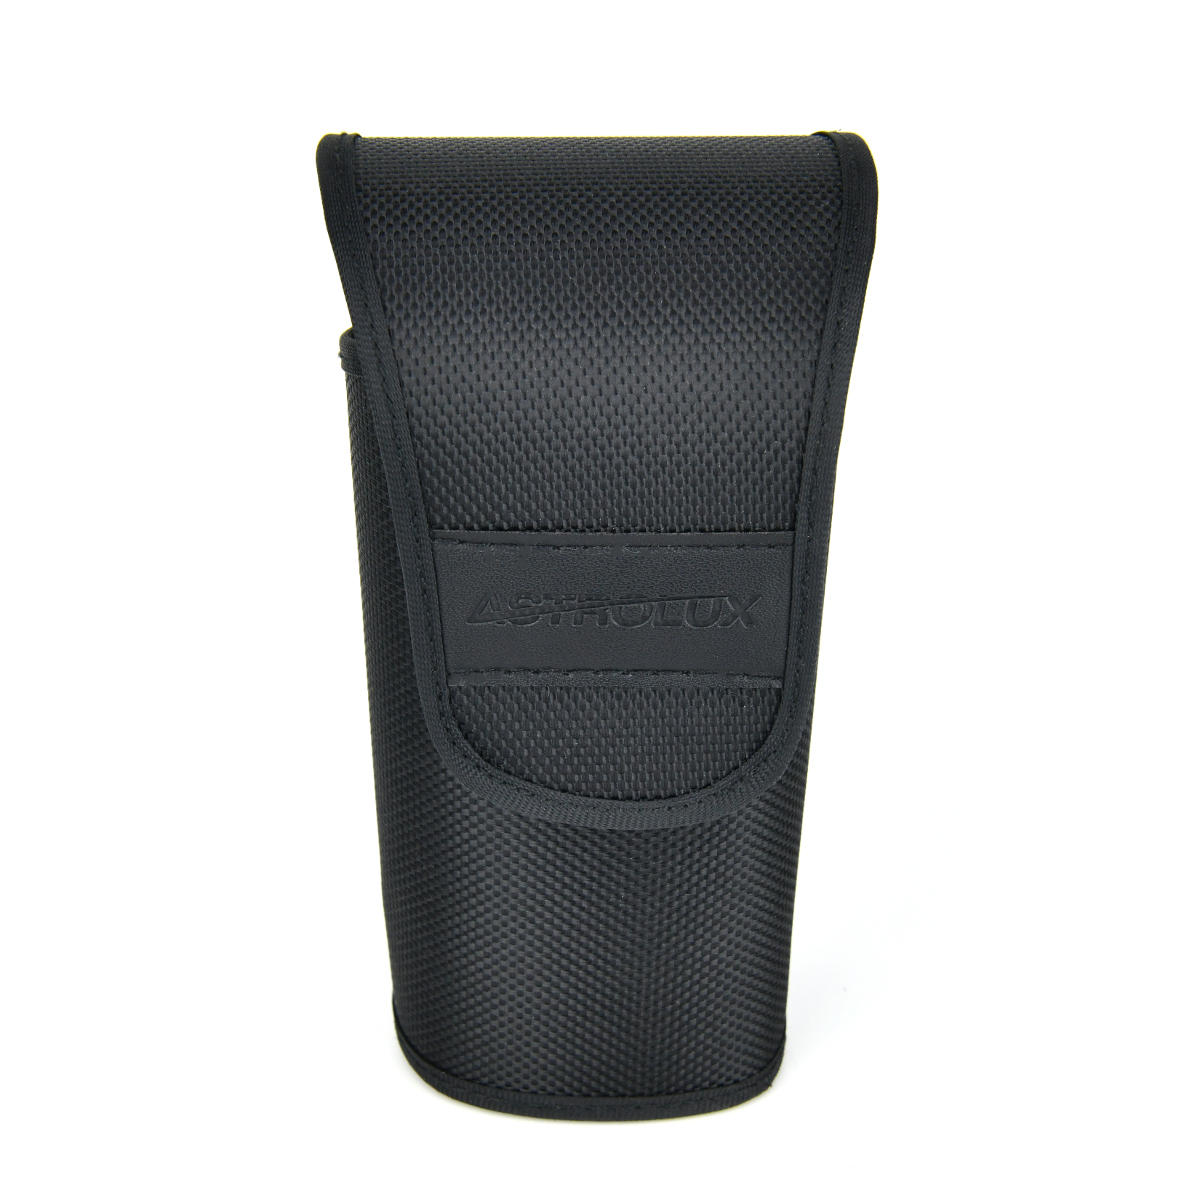 best price,astrolux,flashlight,holster,for,mf01s,mf01,discount